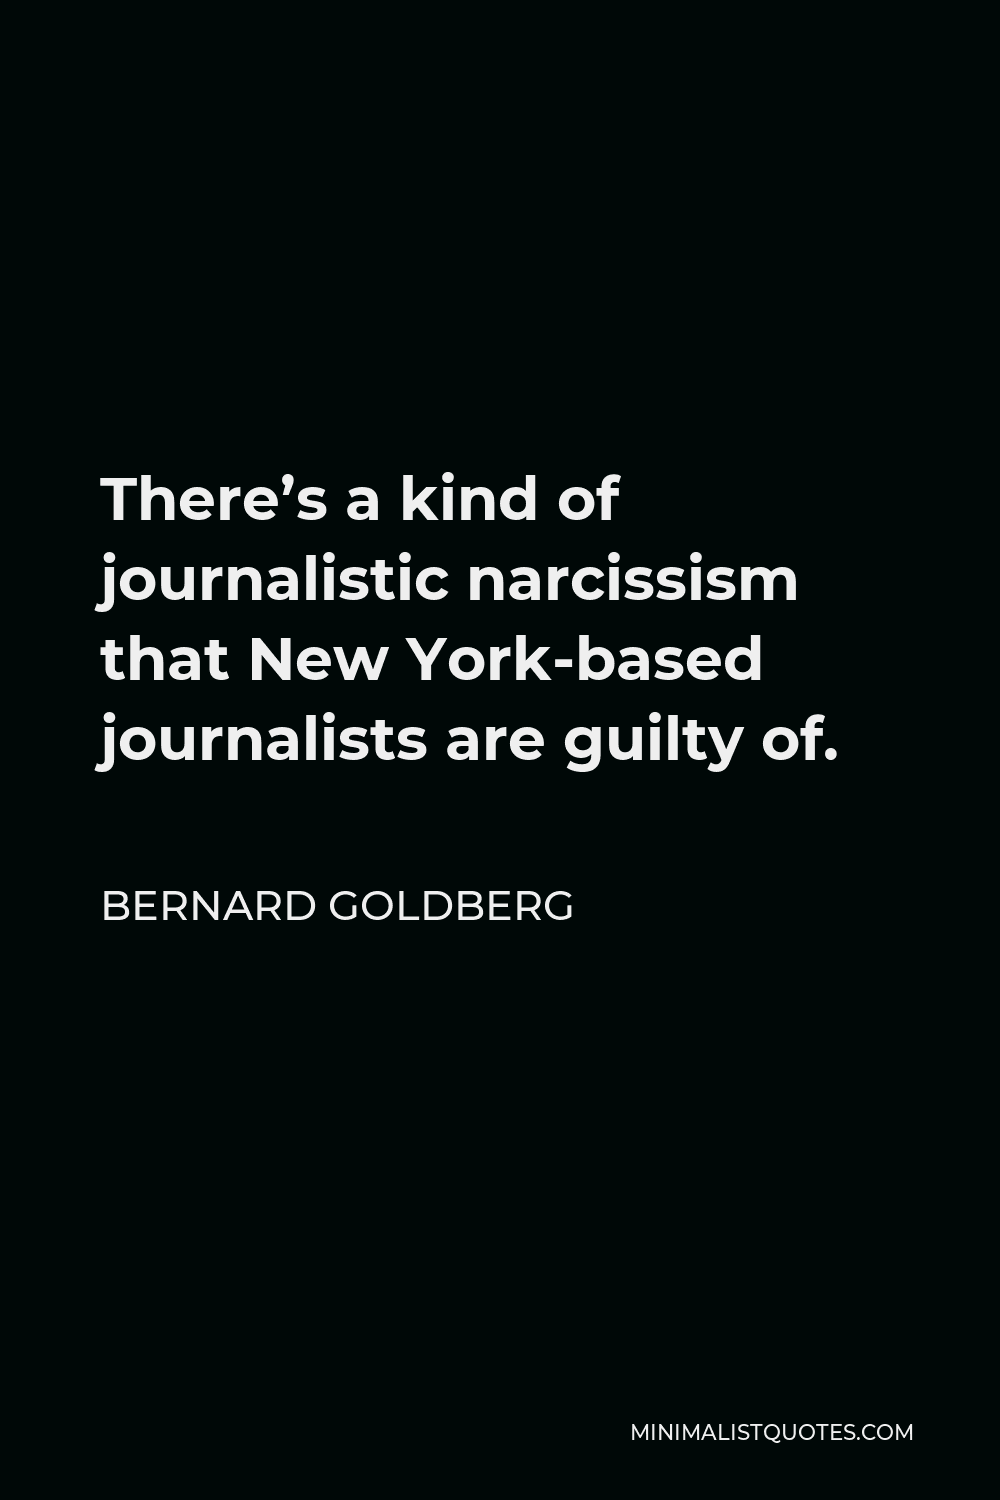 Bernard Goldberg Quote - There’s a kind of journalistic narcissism that New York-based journalists are guilty of.